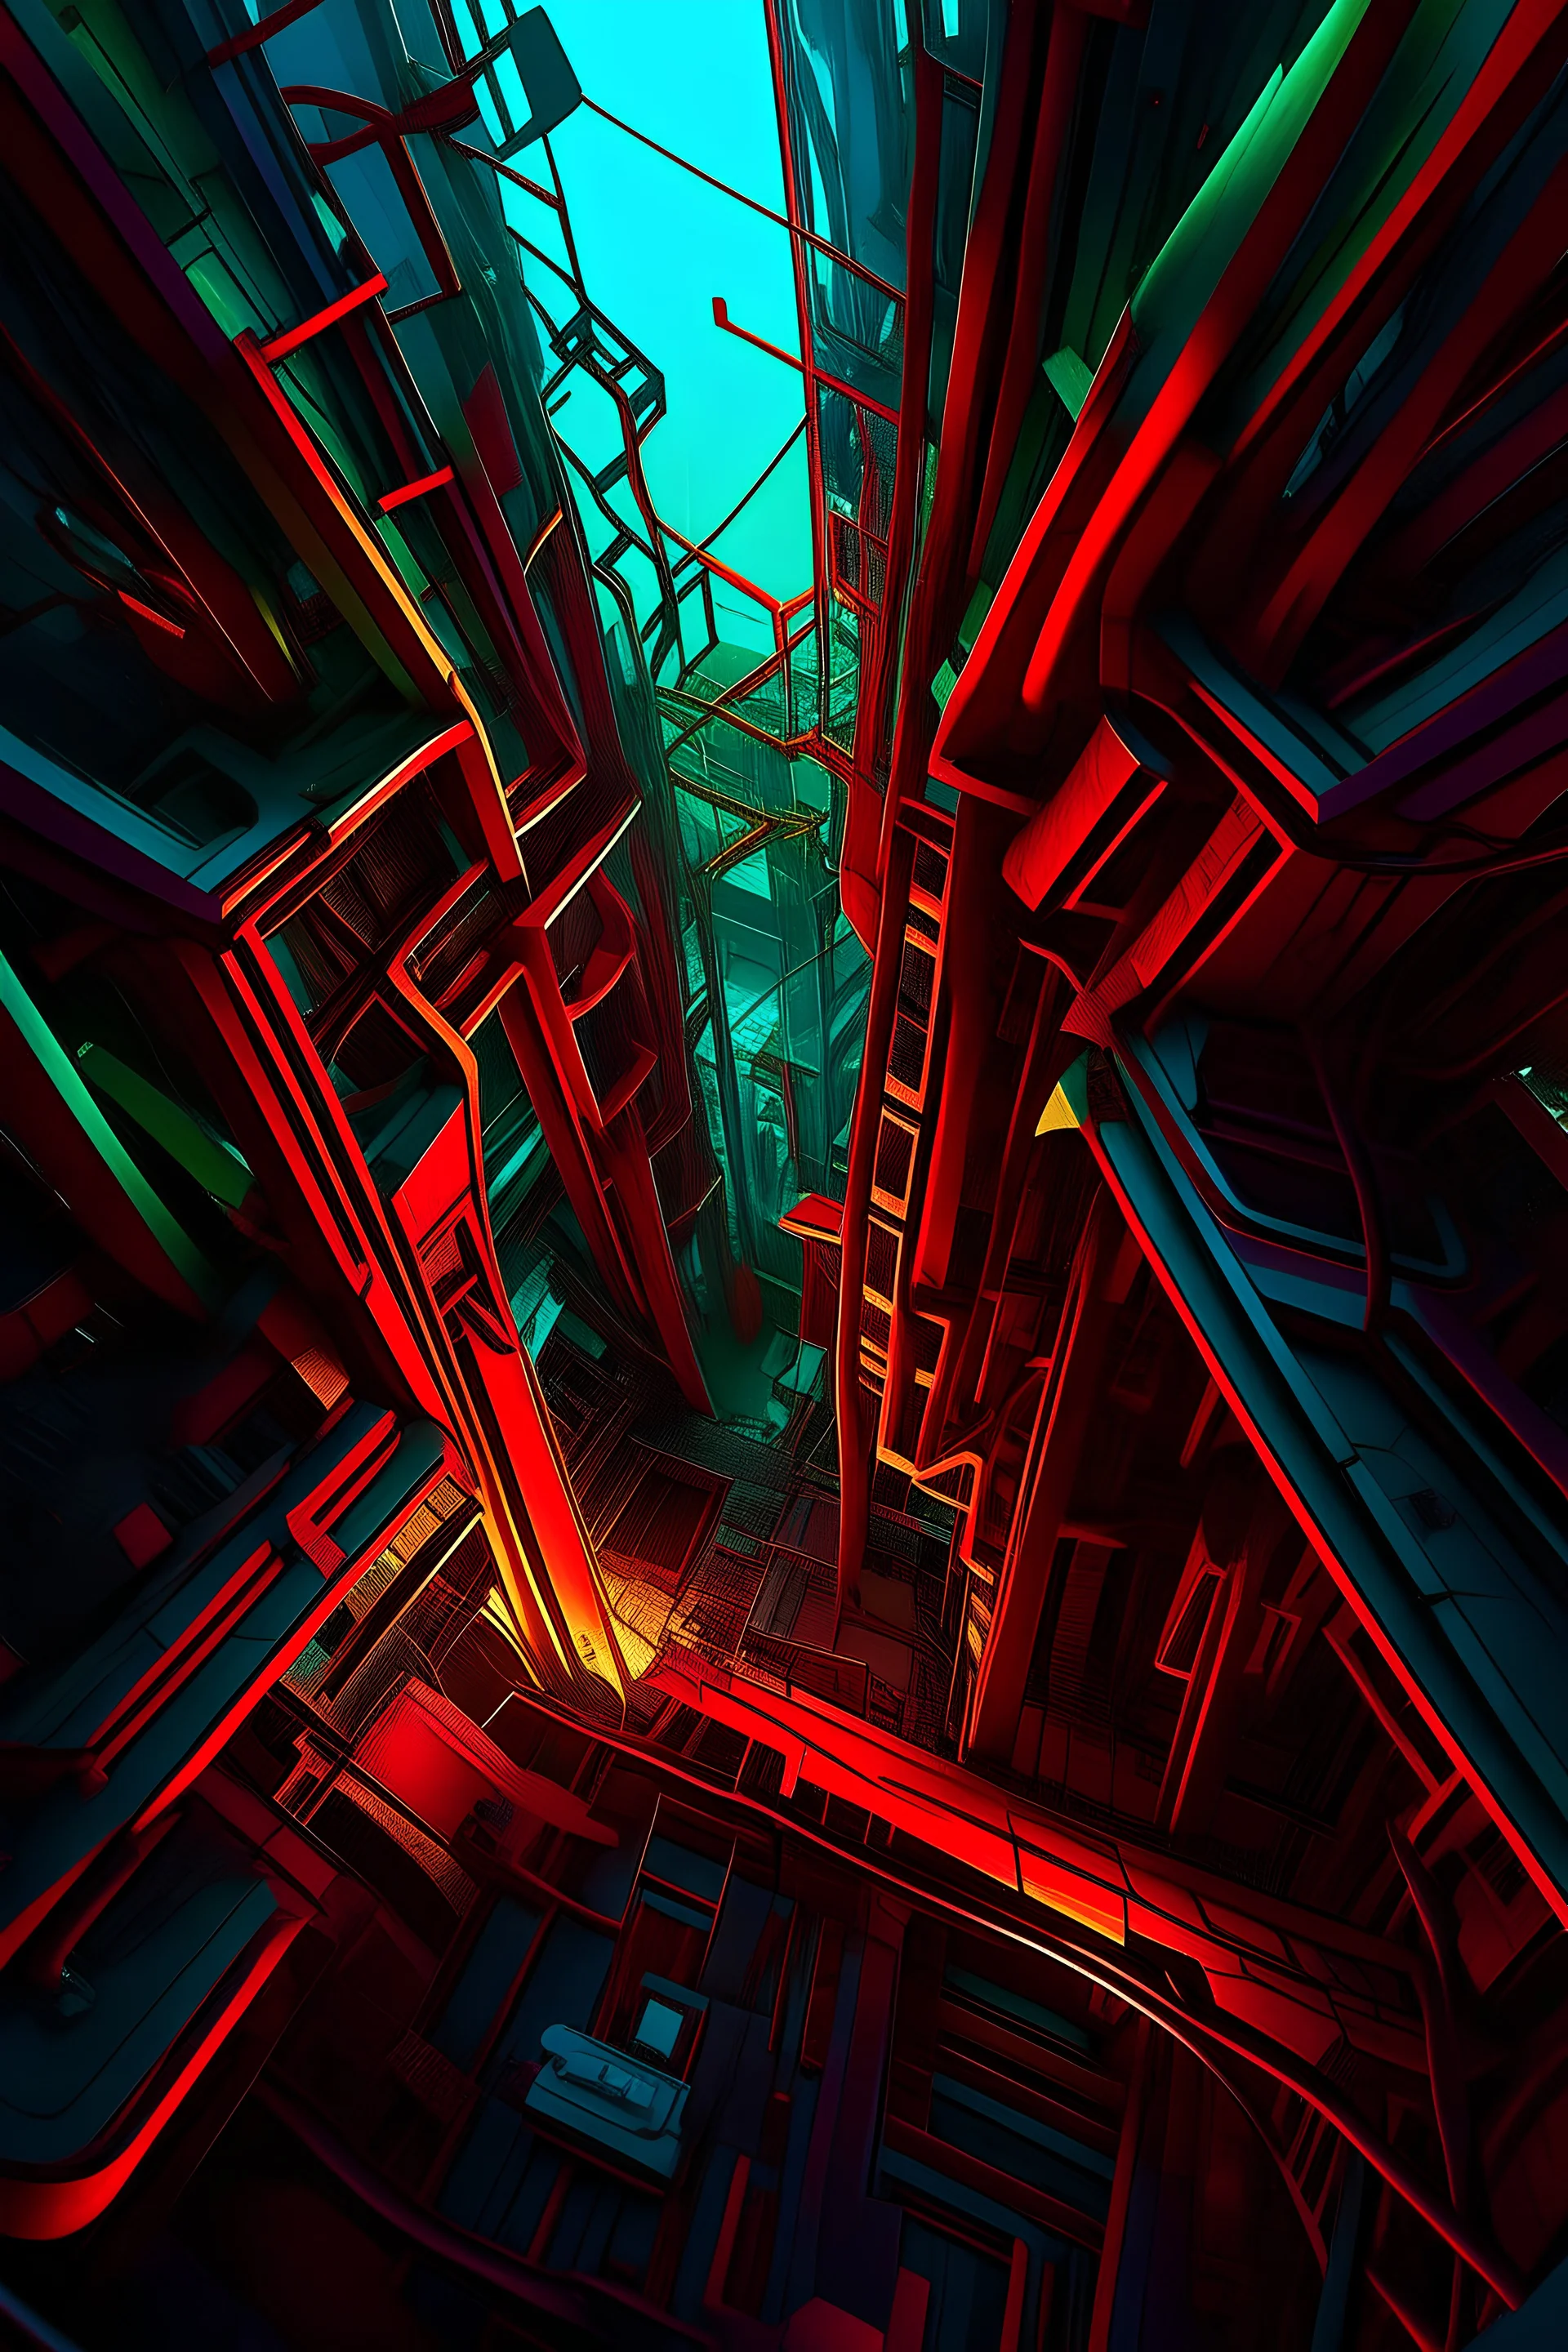 organic mechanical shapes, and many pipes that intertwine in a complex and visually stunning manner, all illuminated by the interplay of vibrant lighting and shadows, reminiscent of the works of Android Jones, Beeple, and Winkelmann, resulting in an awe-inspiring display of maximalism and fantasy.